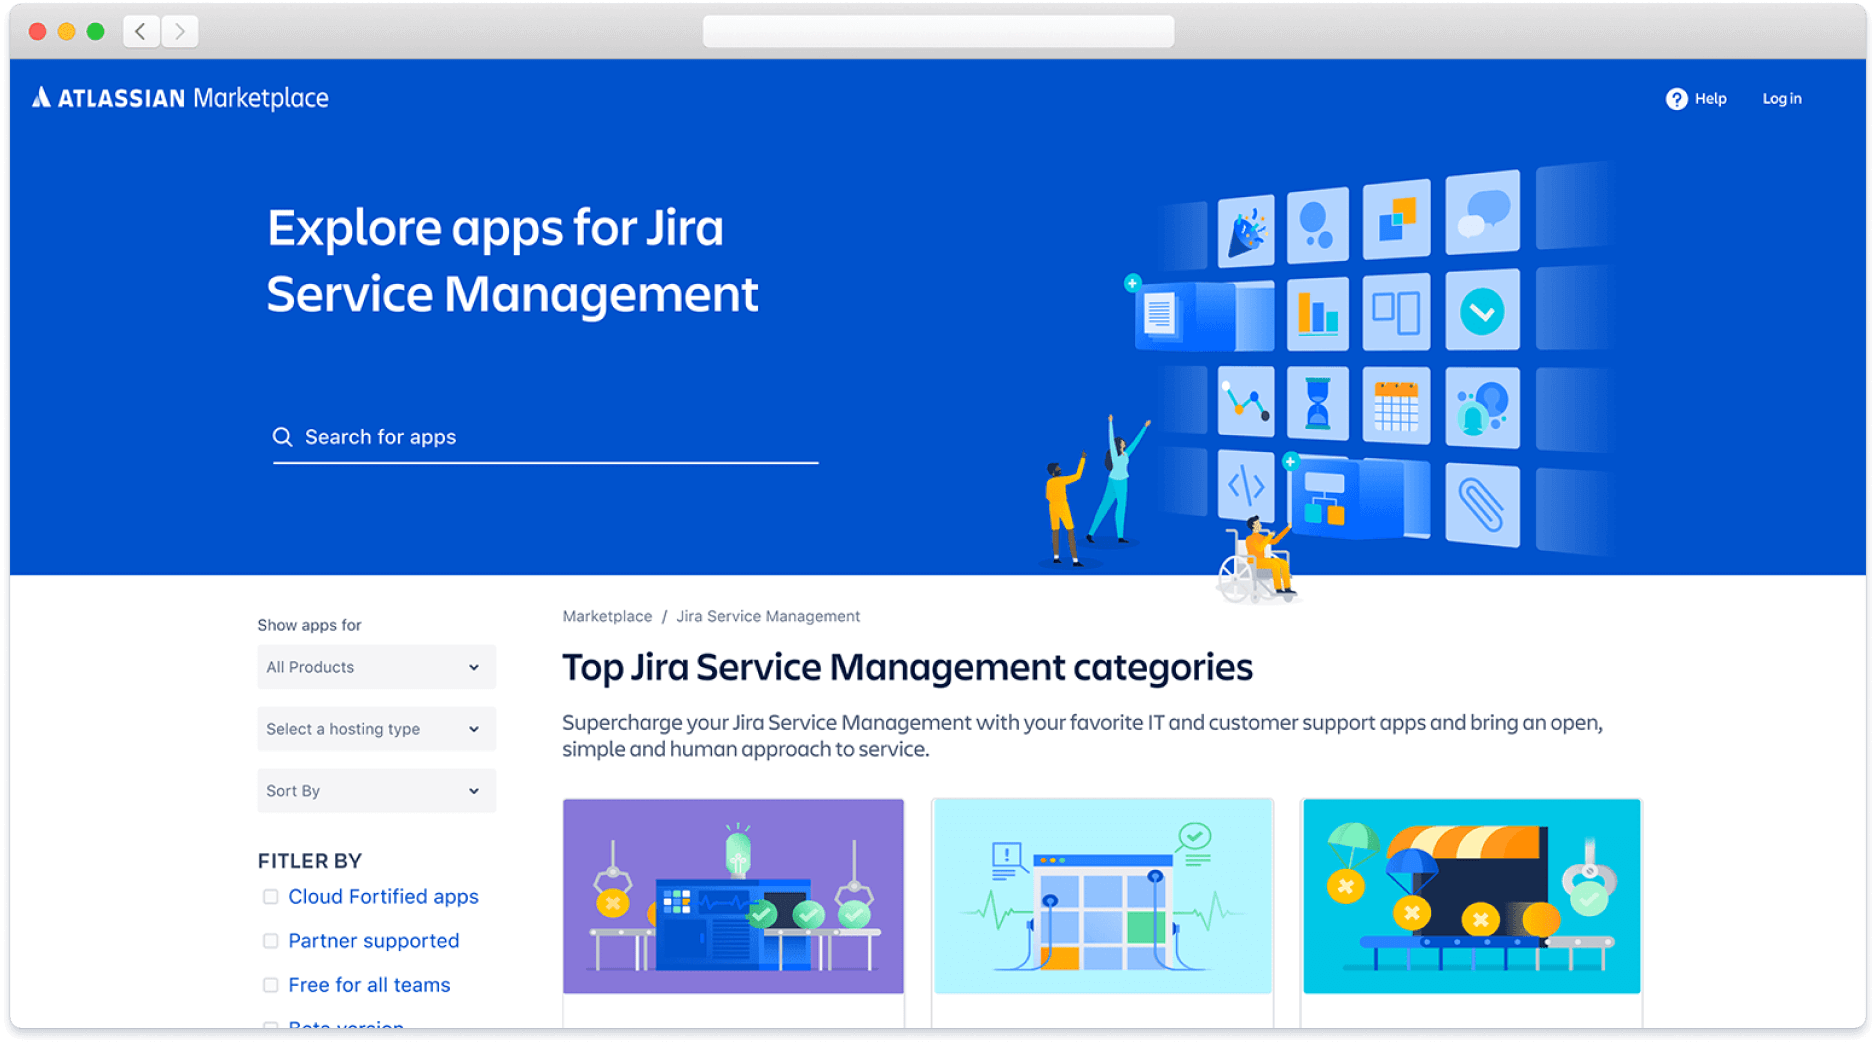 Explore apps for Jira Service Management in the Atlassian Marketplace